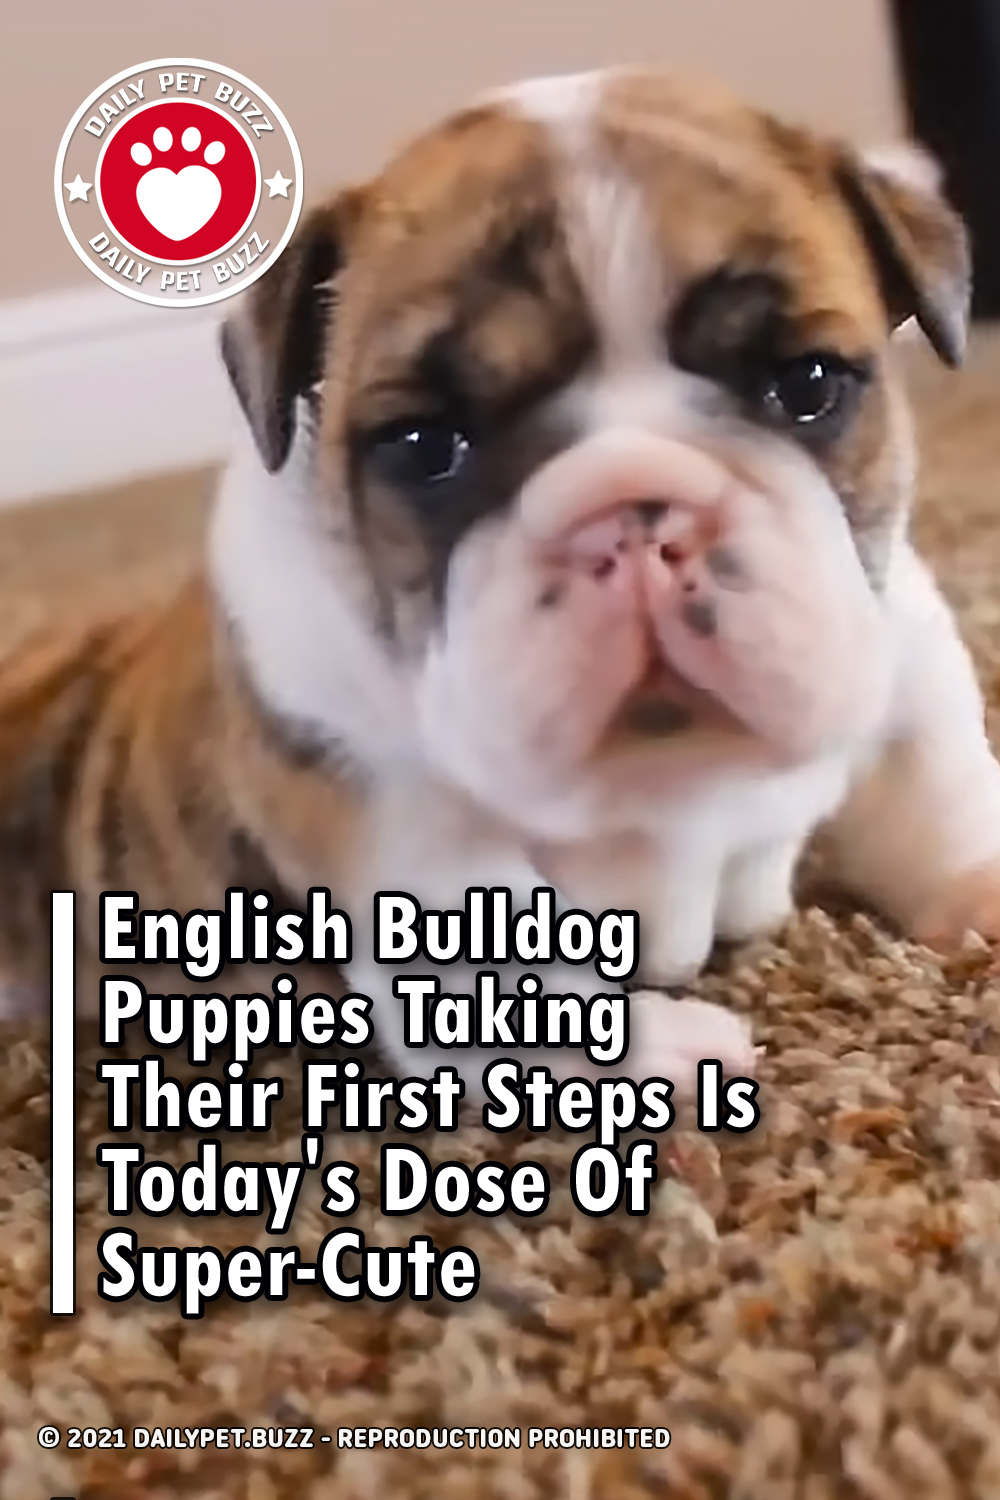 English Bulldog Puppies Taking Their First Steps Is Today\'s Dose Of Super-Cute